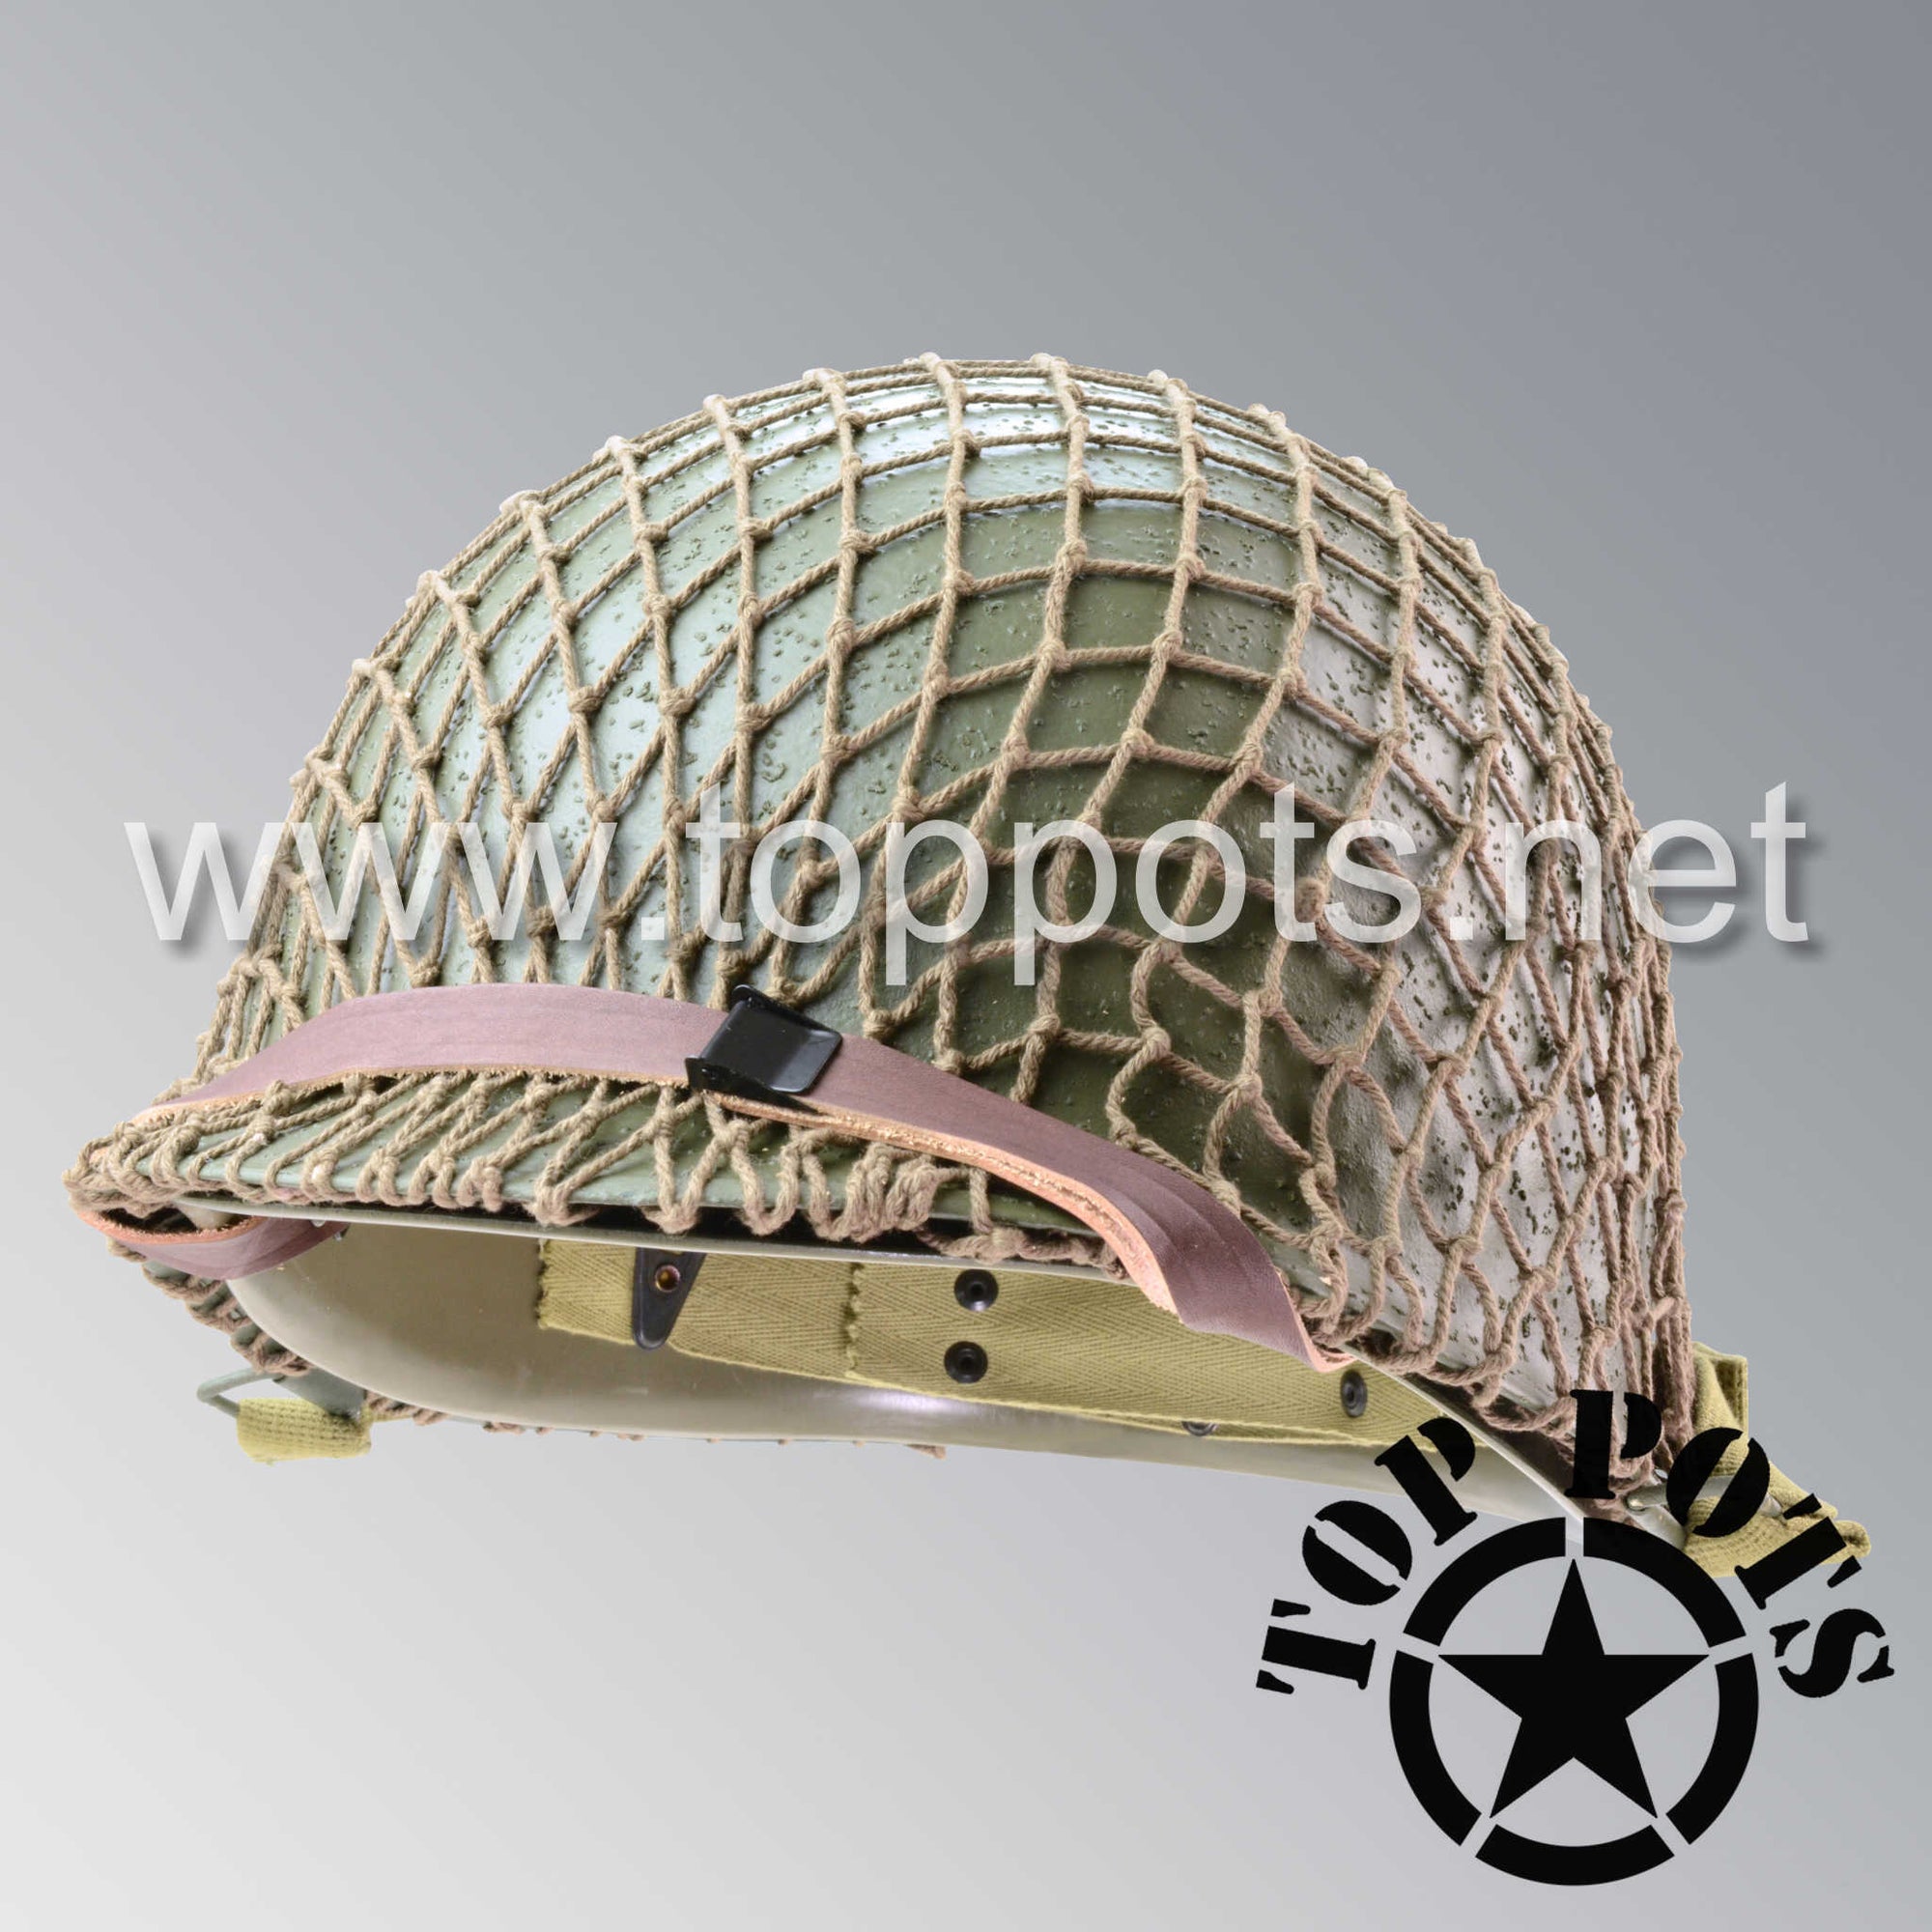 WWII US Army Reproduction M1 Infantry Helmet Swivel Bale Shell and Liner with Net